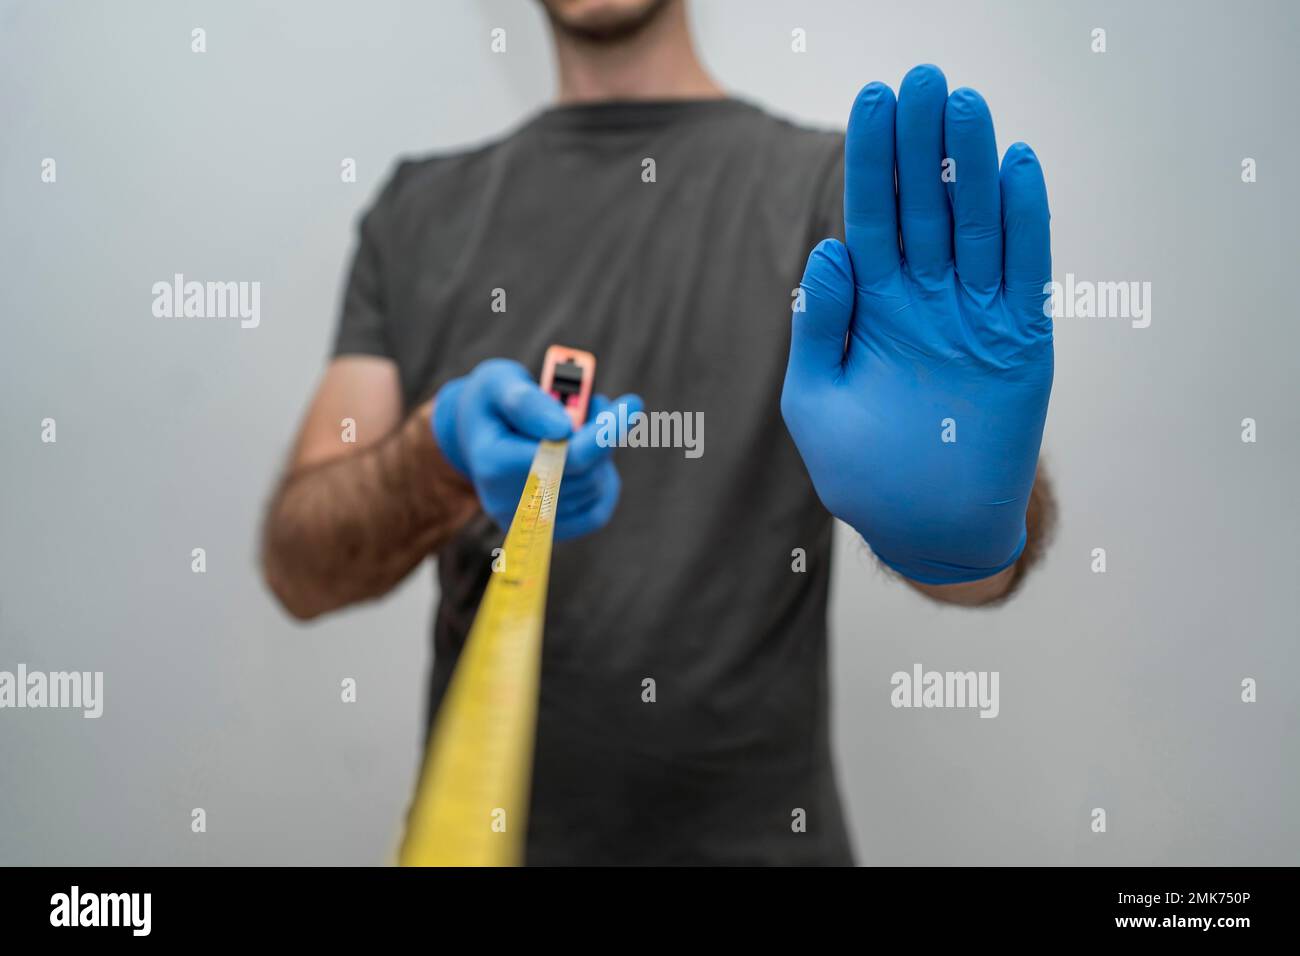 man with gloves holding tape measurer social distancing. High resolution photo Stock Photo